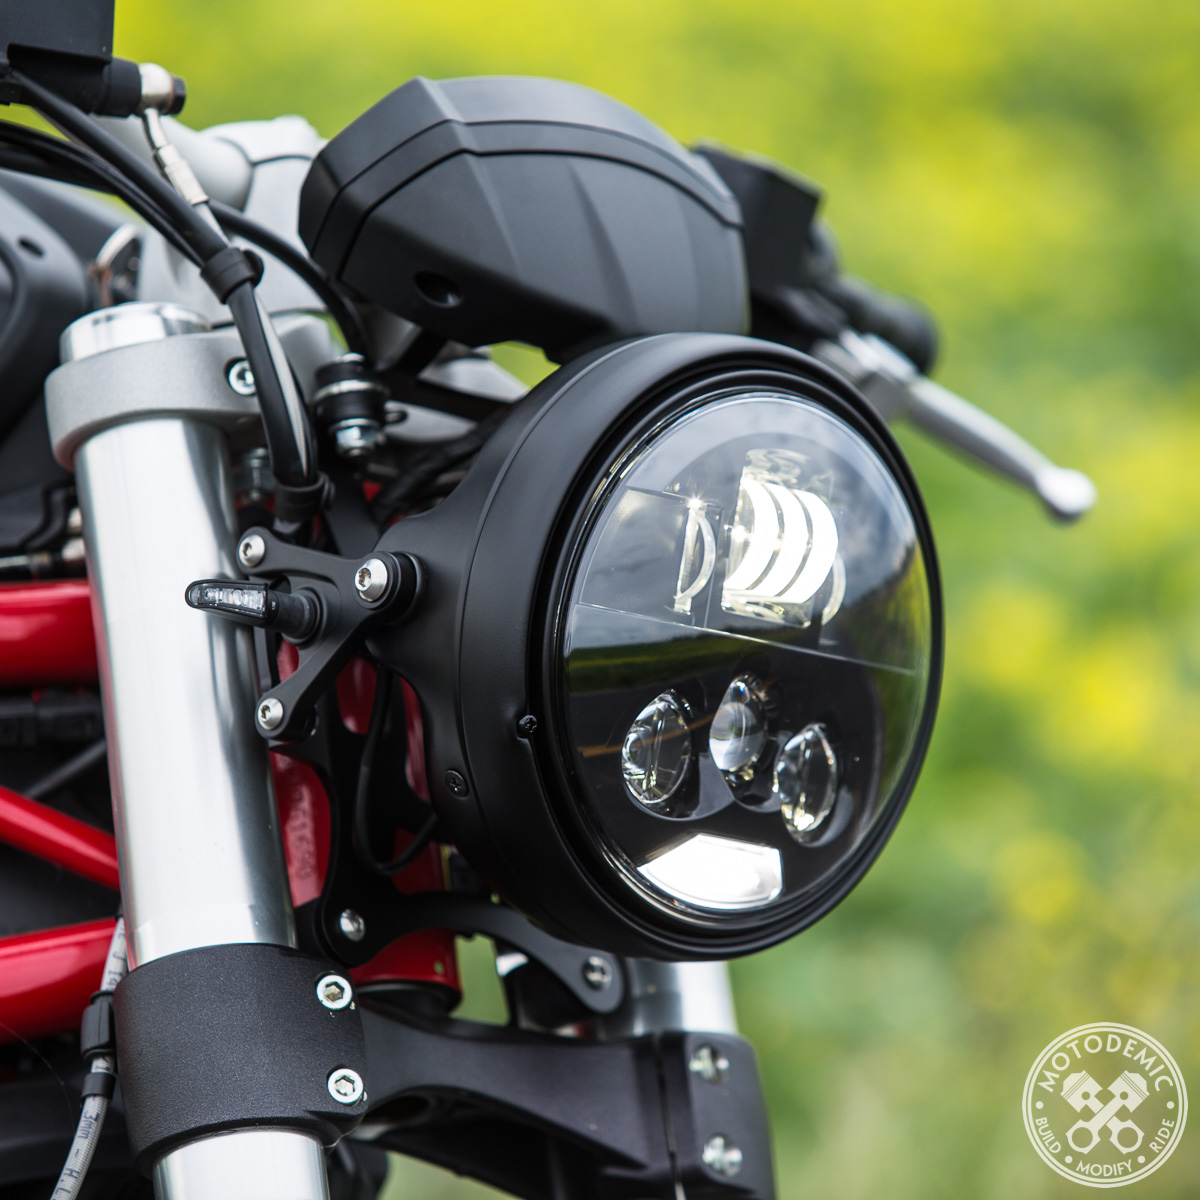 LED headlight for Ducati Scrambler Full Throttle - Round motorcycle optics  approved